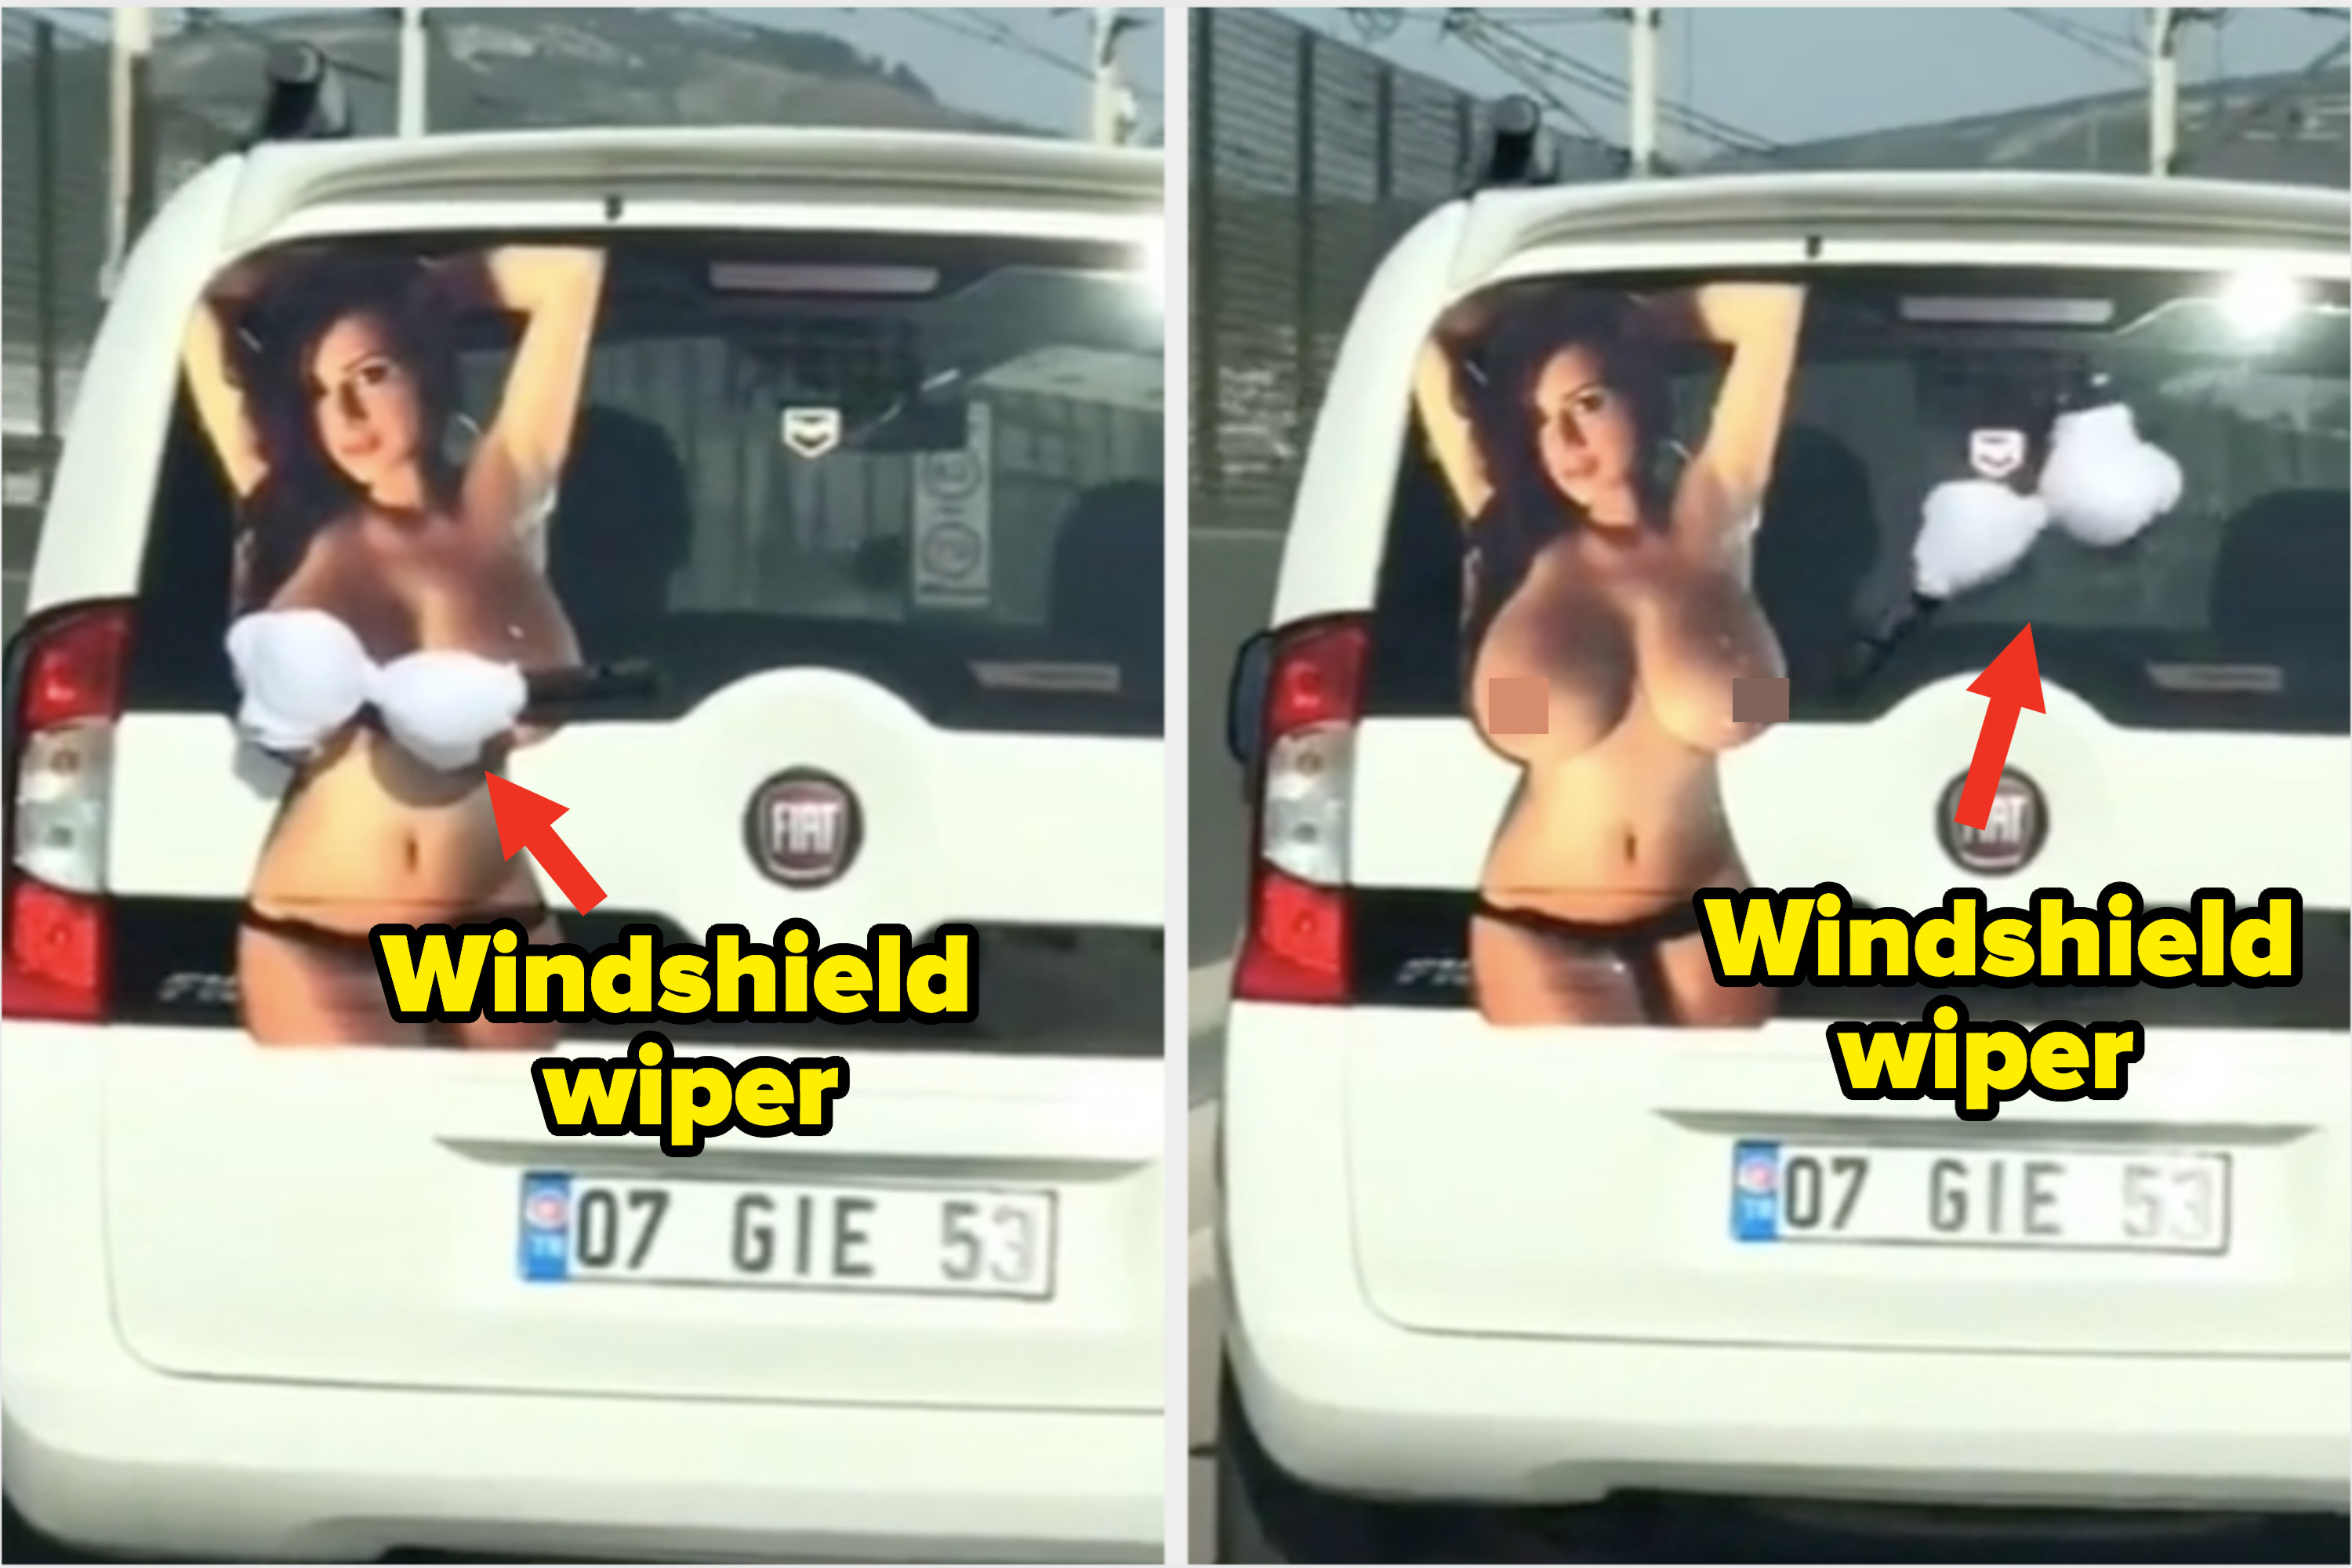 Windshield wipers showing a woman's breasts